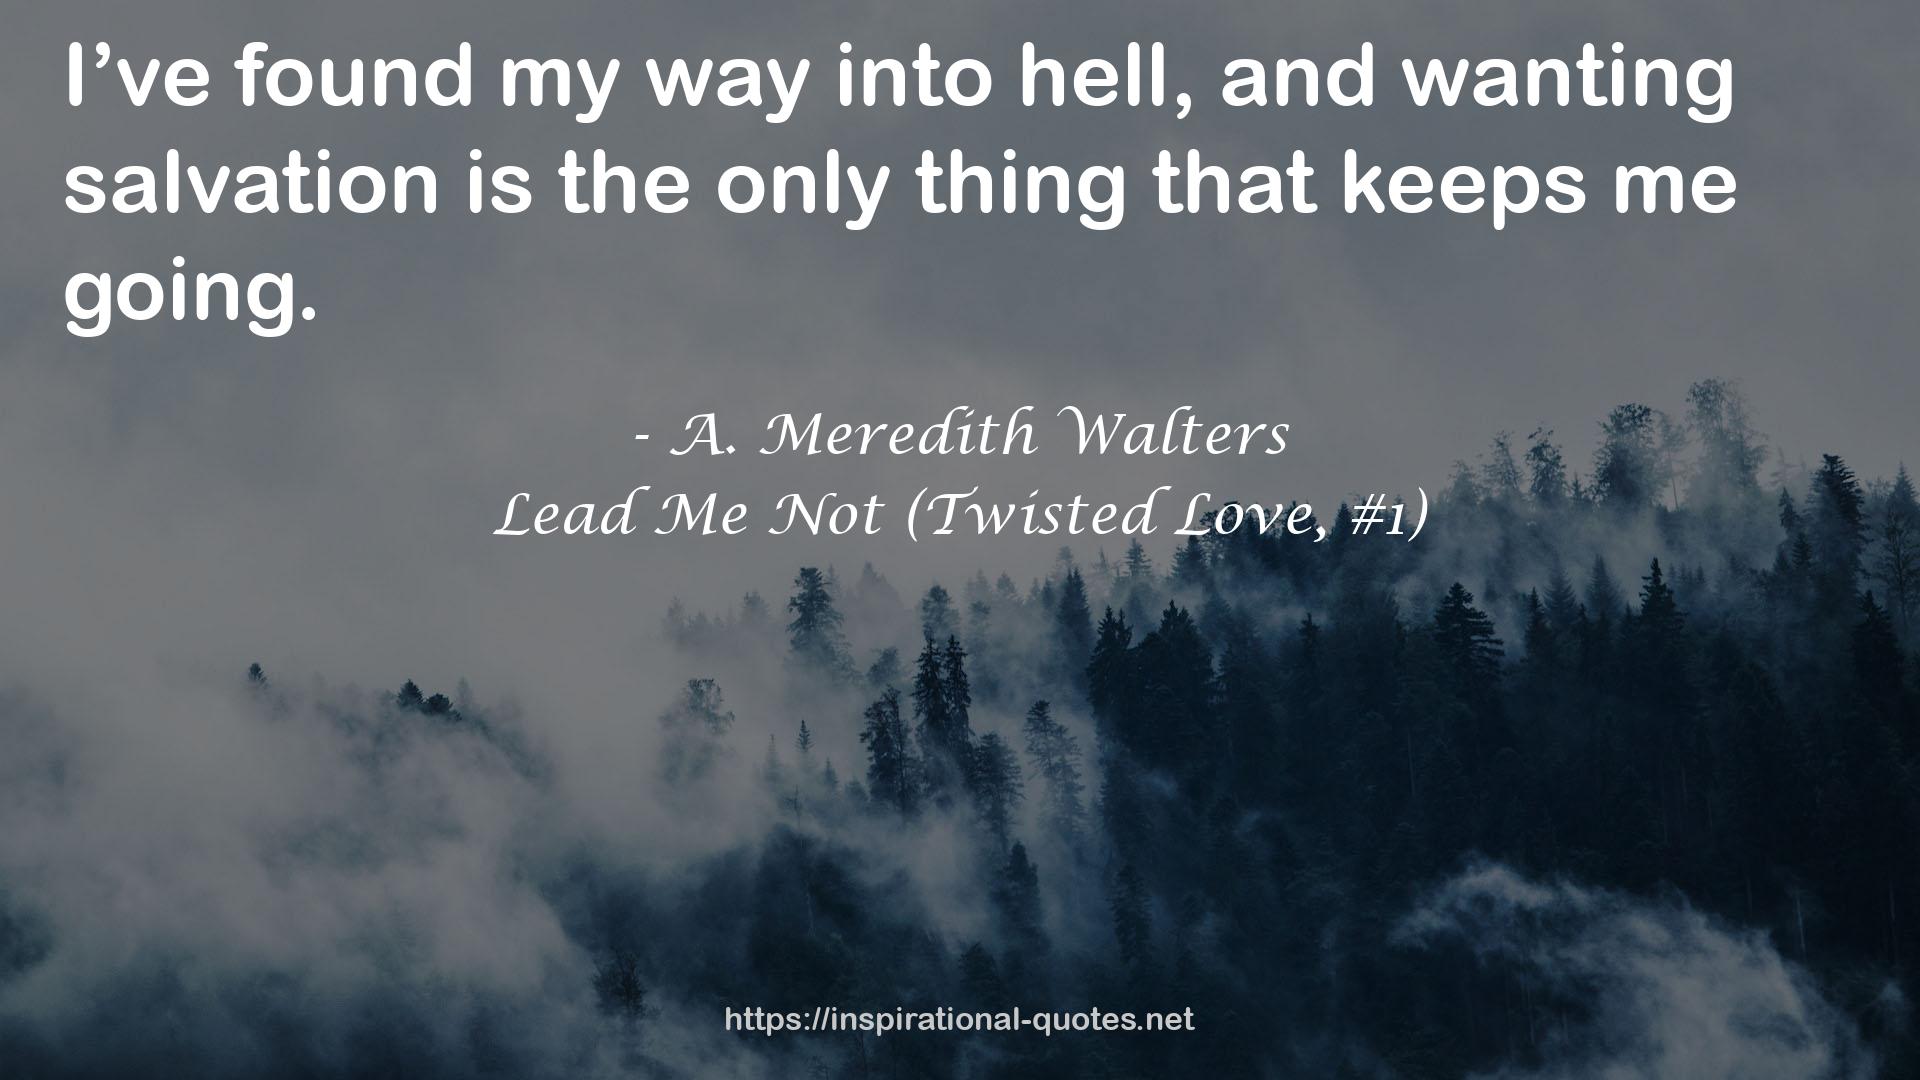 Lead Me Not (Twisted Love, #1) QUOTES